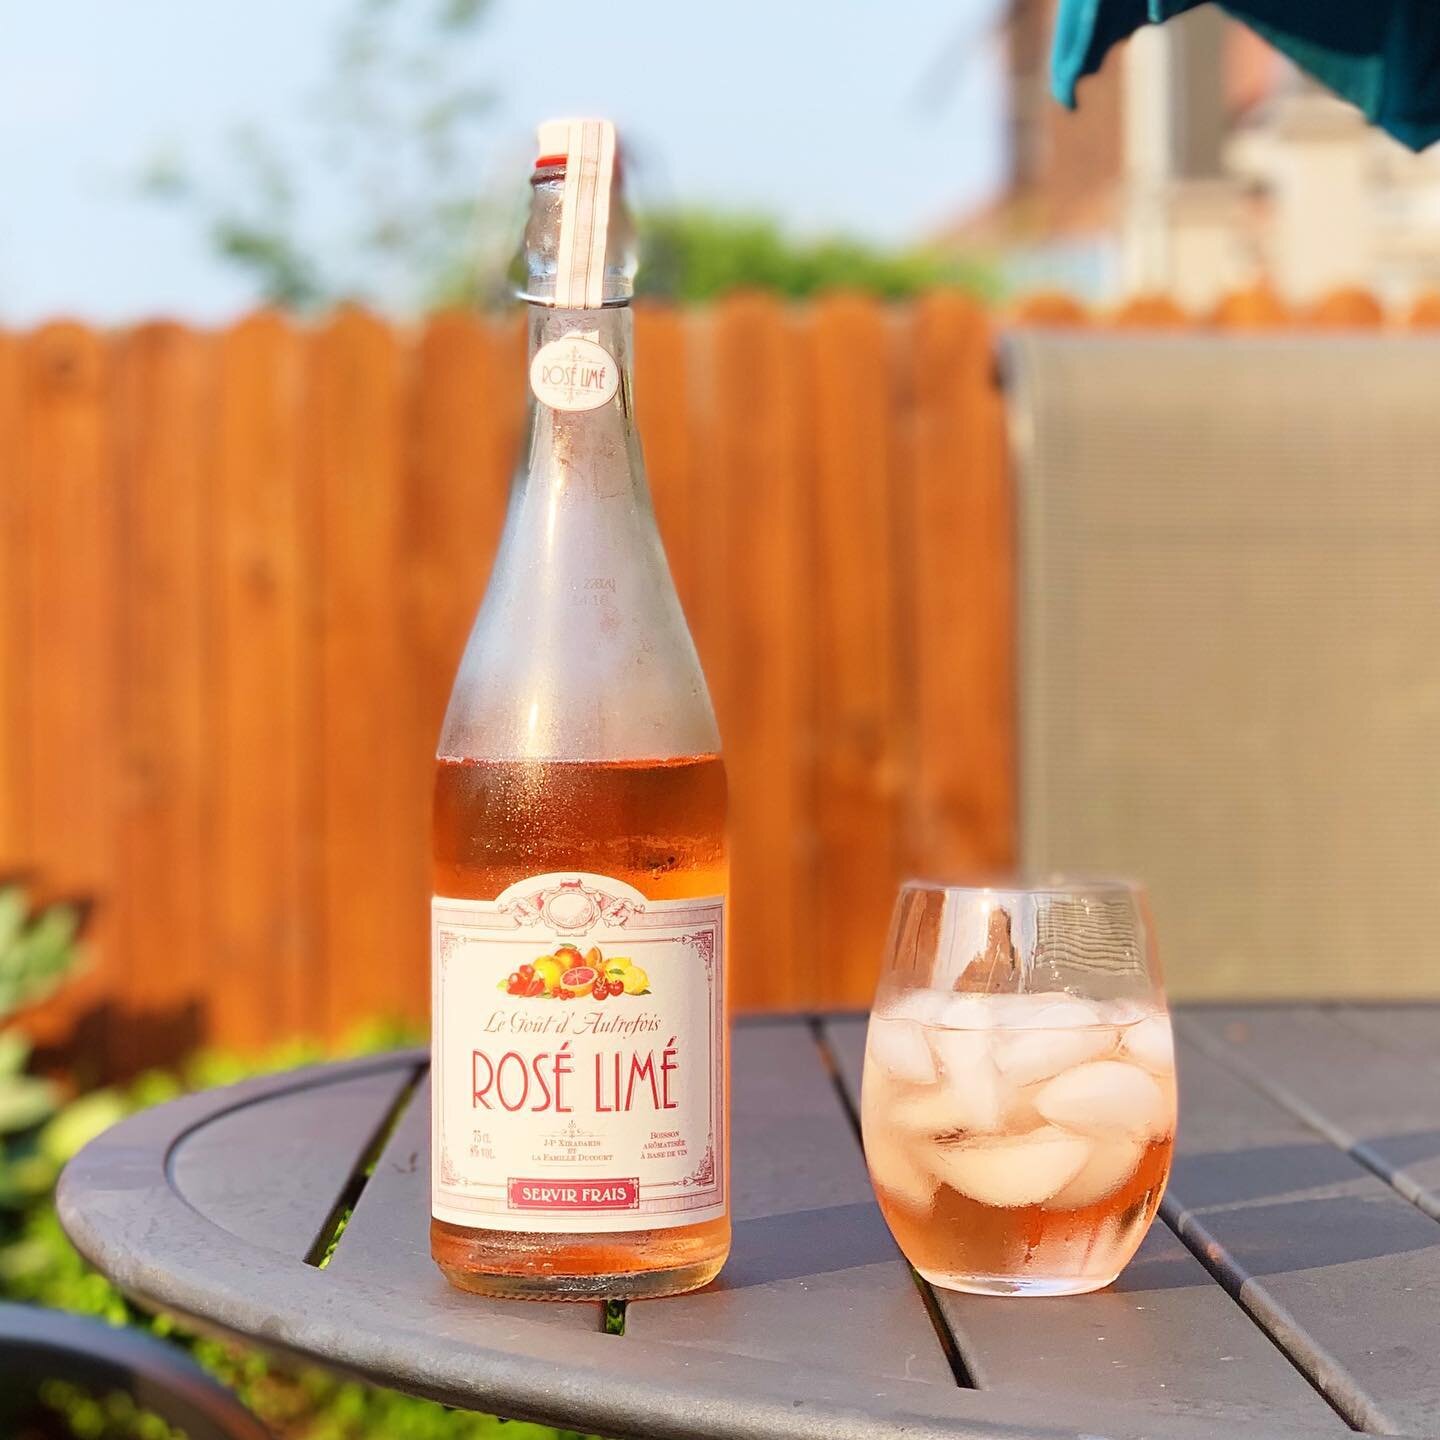 What&rsquo;s your favorite ap&eacute;ritif? ☀️ 
&hellip;
Typically I&rsquo;m Team Campari Spritz 🍊 for ap&eacute;ritif or aperitivo. But when I got this sample of Ros&eacute; Lim&eacute; @leblanclime I had to switch things up and pour it on a summer